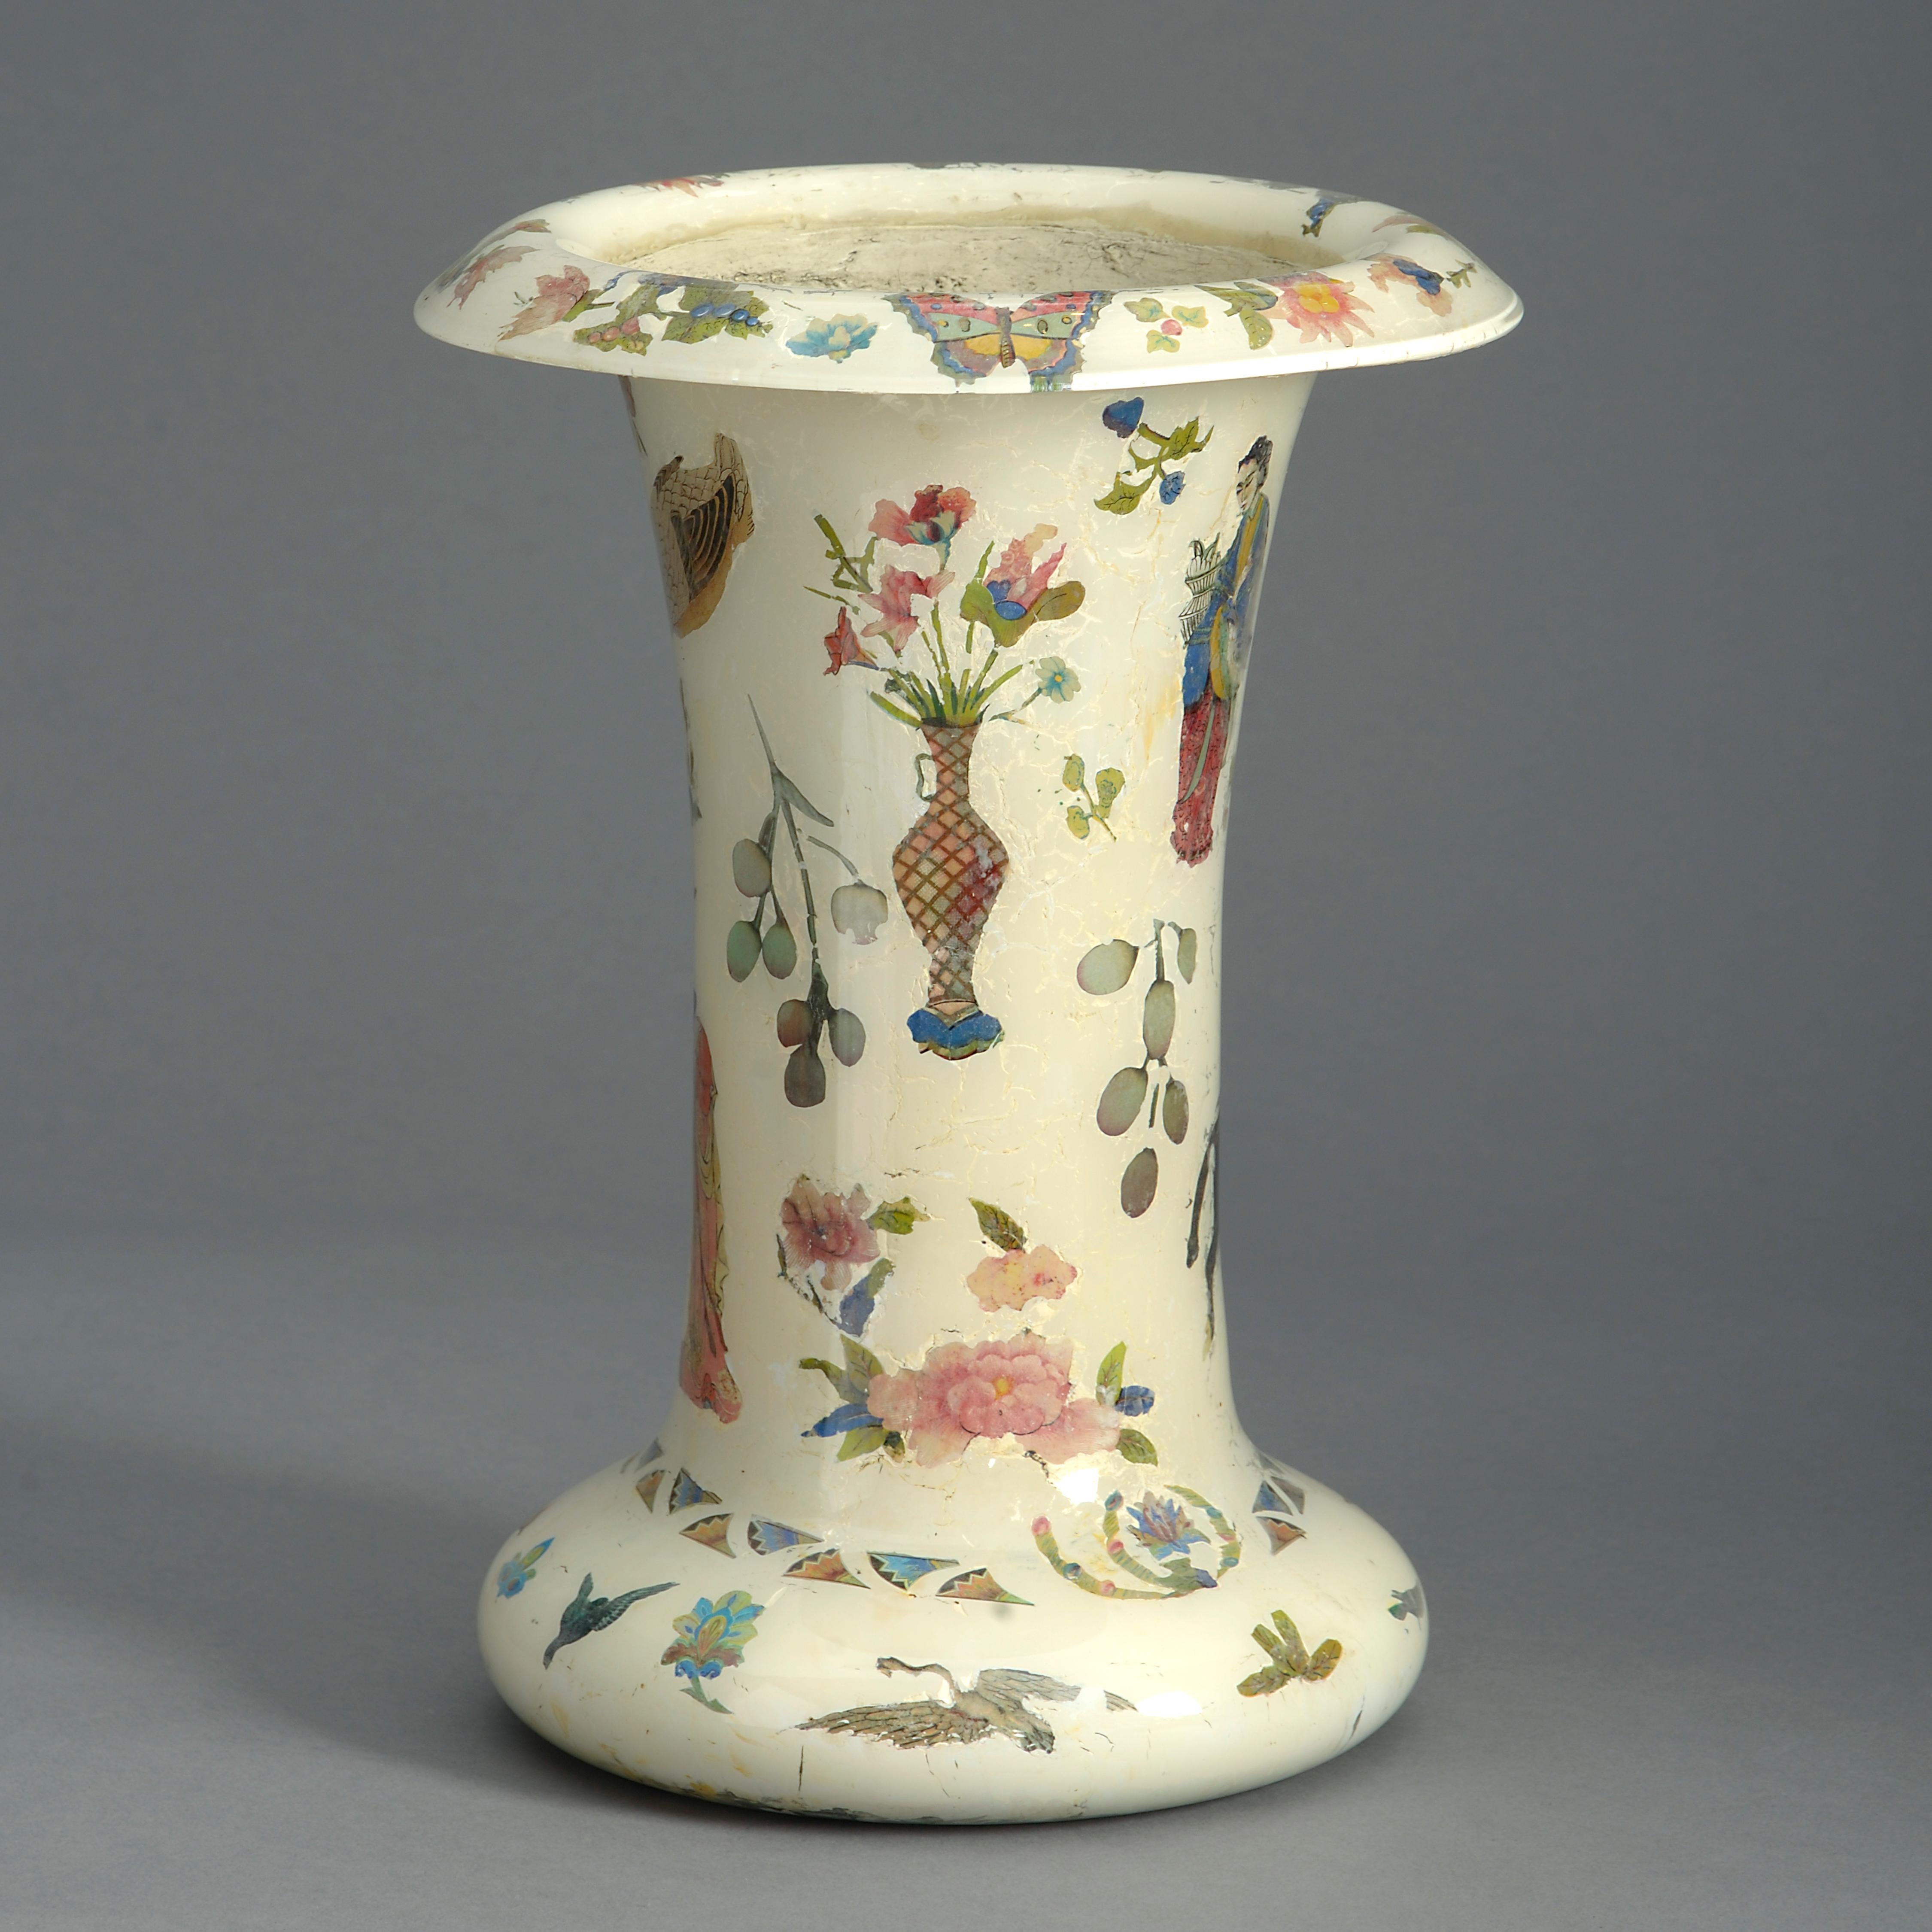 A mid-nineteenth century Decalcomania vase of trumpet form, with a roll top and concave body, decorated throughout with chinoiserie on a cream ground.